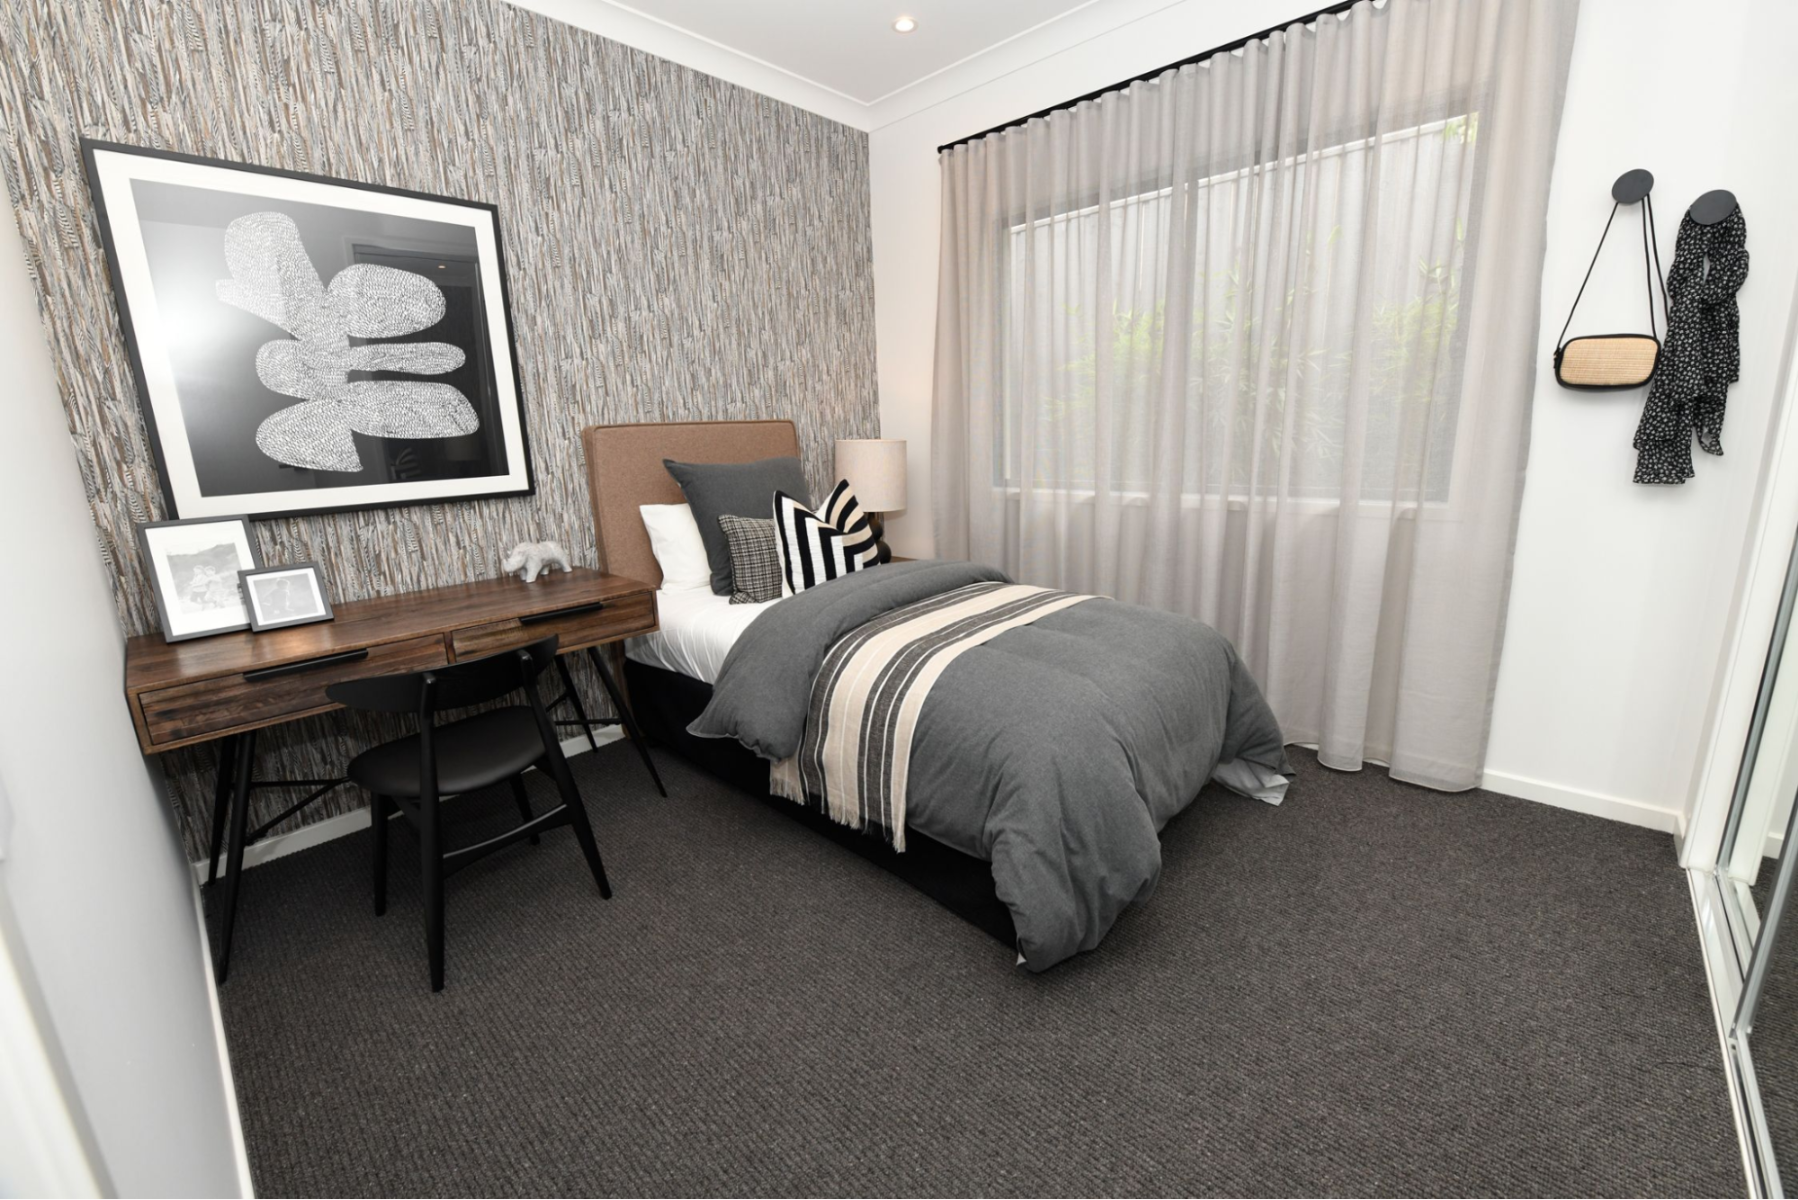 Small bedroom with grey carpets, a single bed in the corner, white walls and grey wallpaper